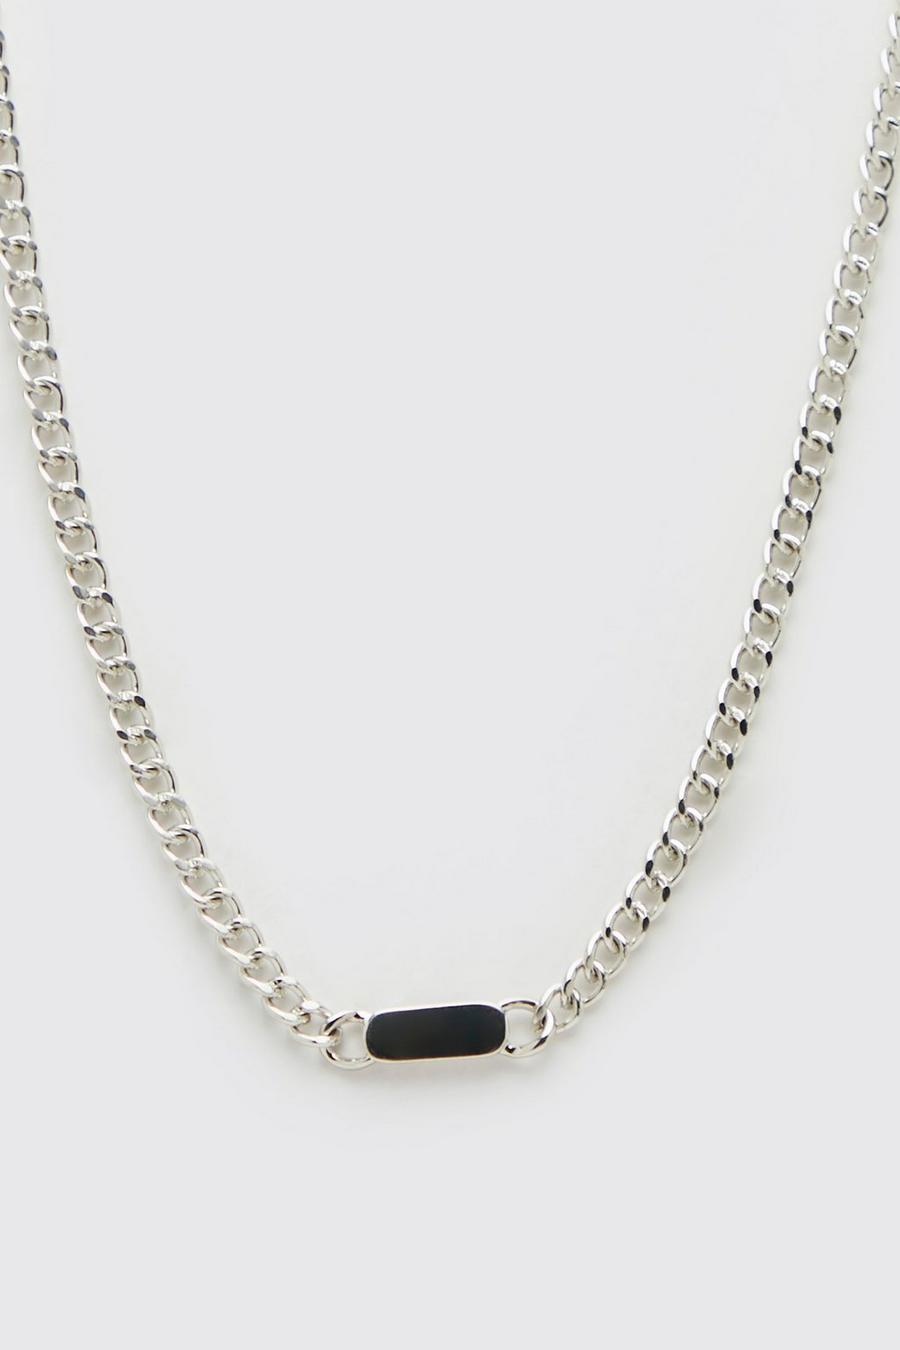 Silver argent Chunky Chain Necklace